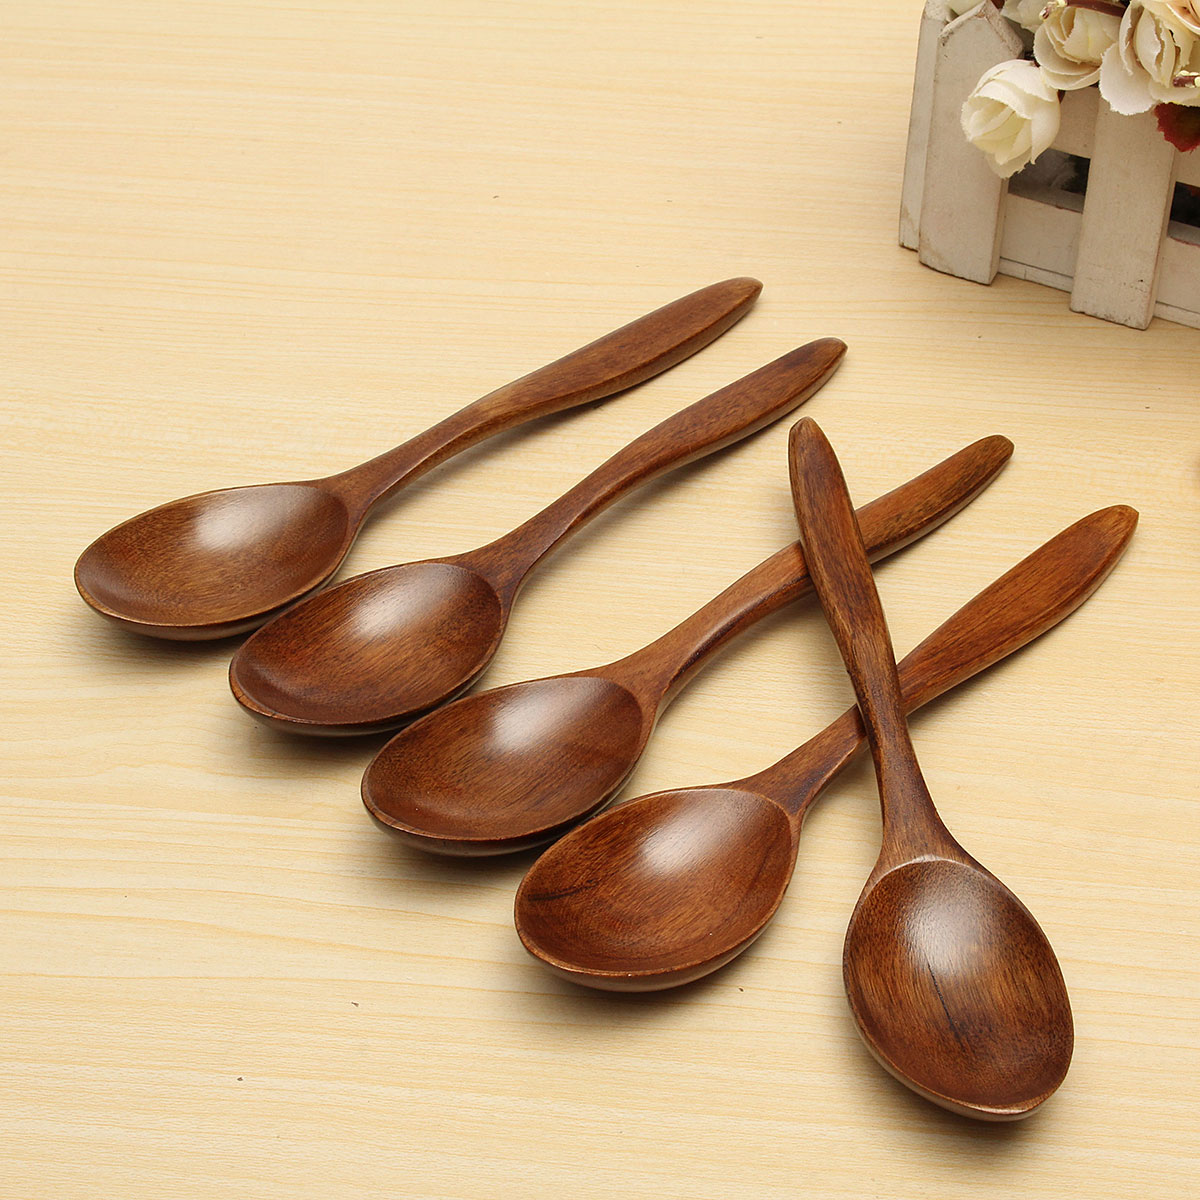 5Pcs-Wooden-Cooking-Kitchen-Utensil-Coffee-Tea-Ice-Cream-Soup-Caterin-Spoon-Tool-1067937-2